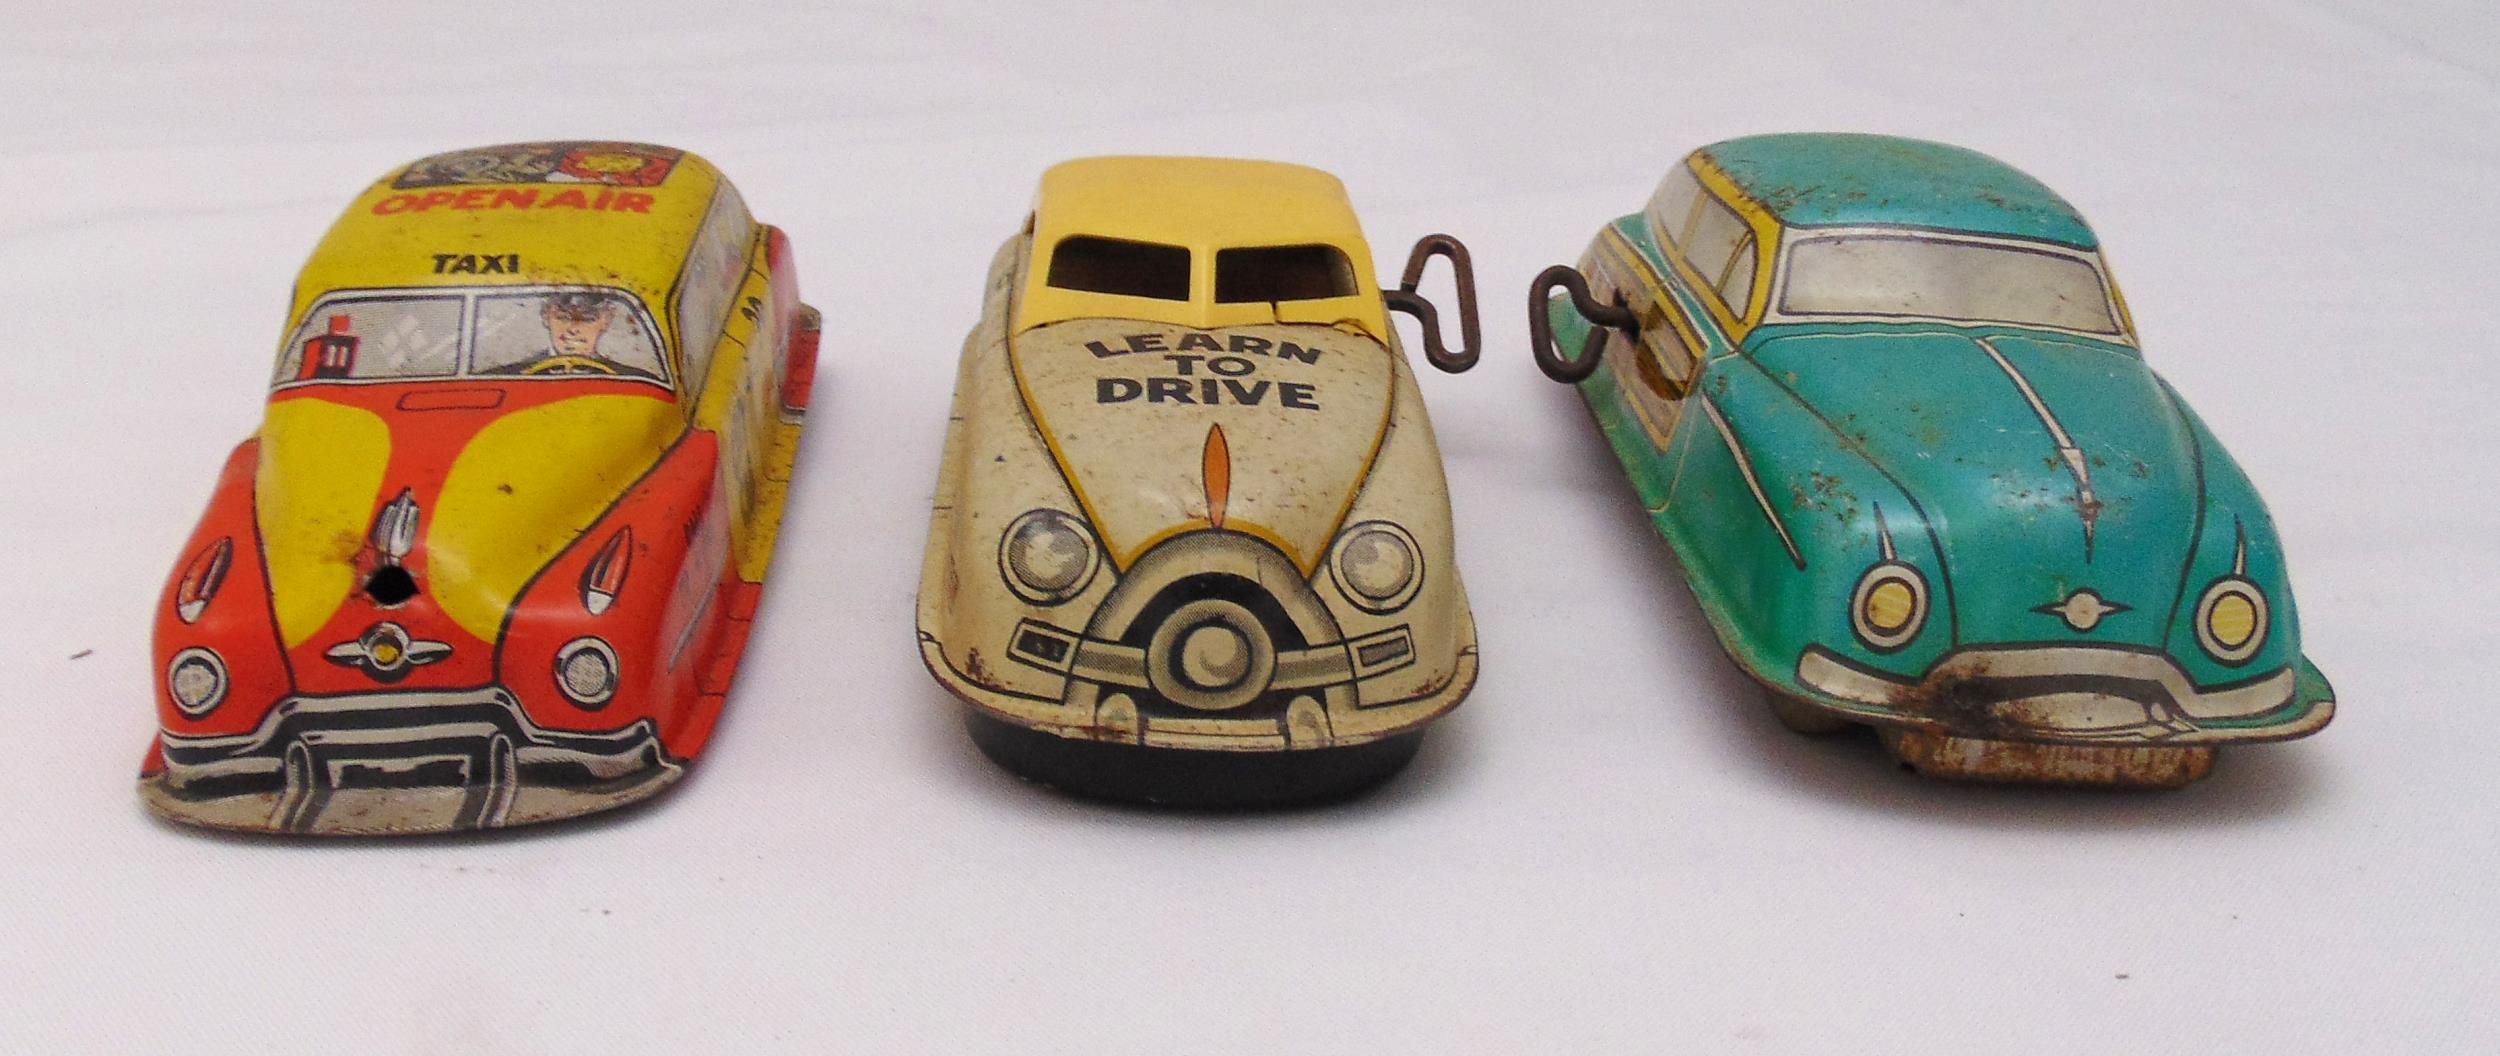 Three vintage litho tin plate toy cars, to include wind up car no 1 learn to drive, friction Taxi no